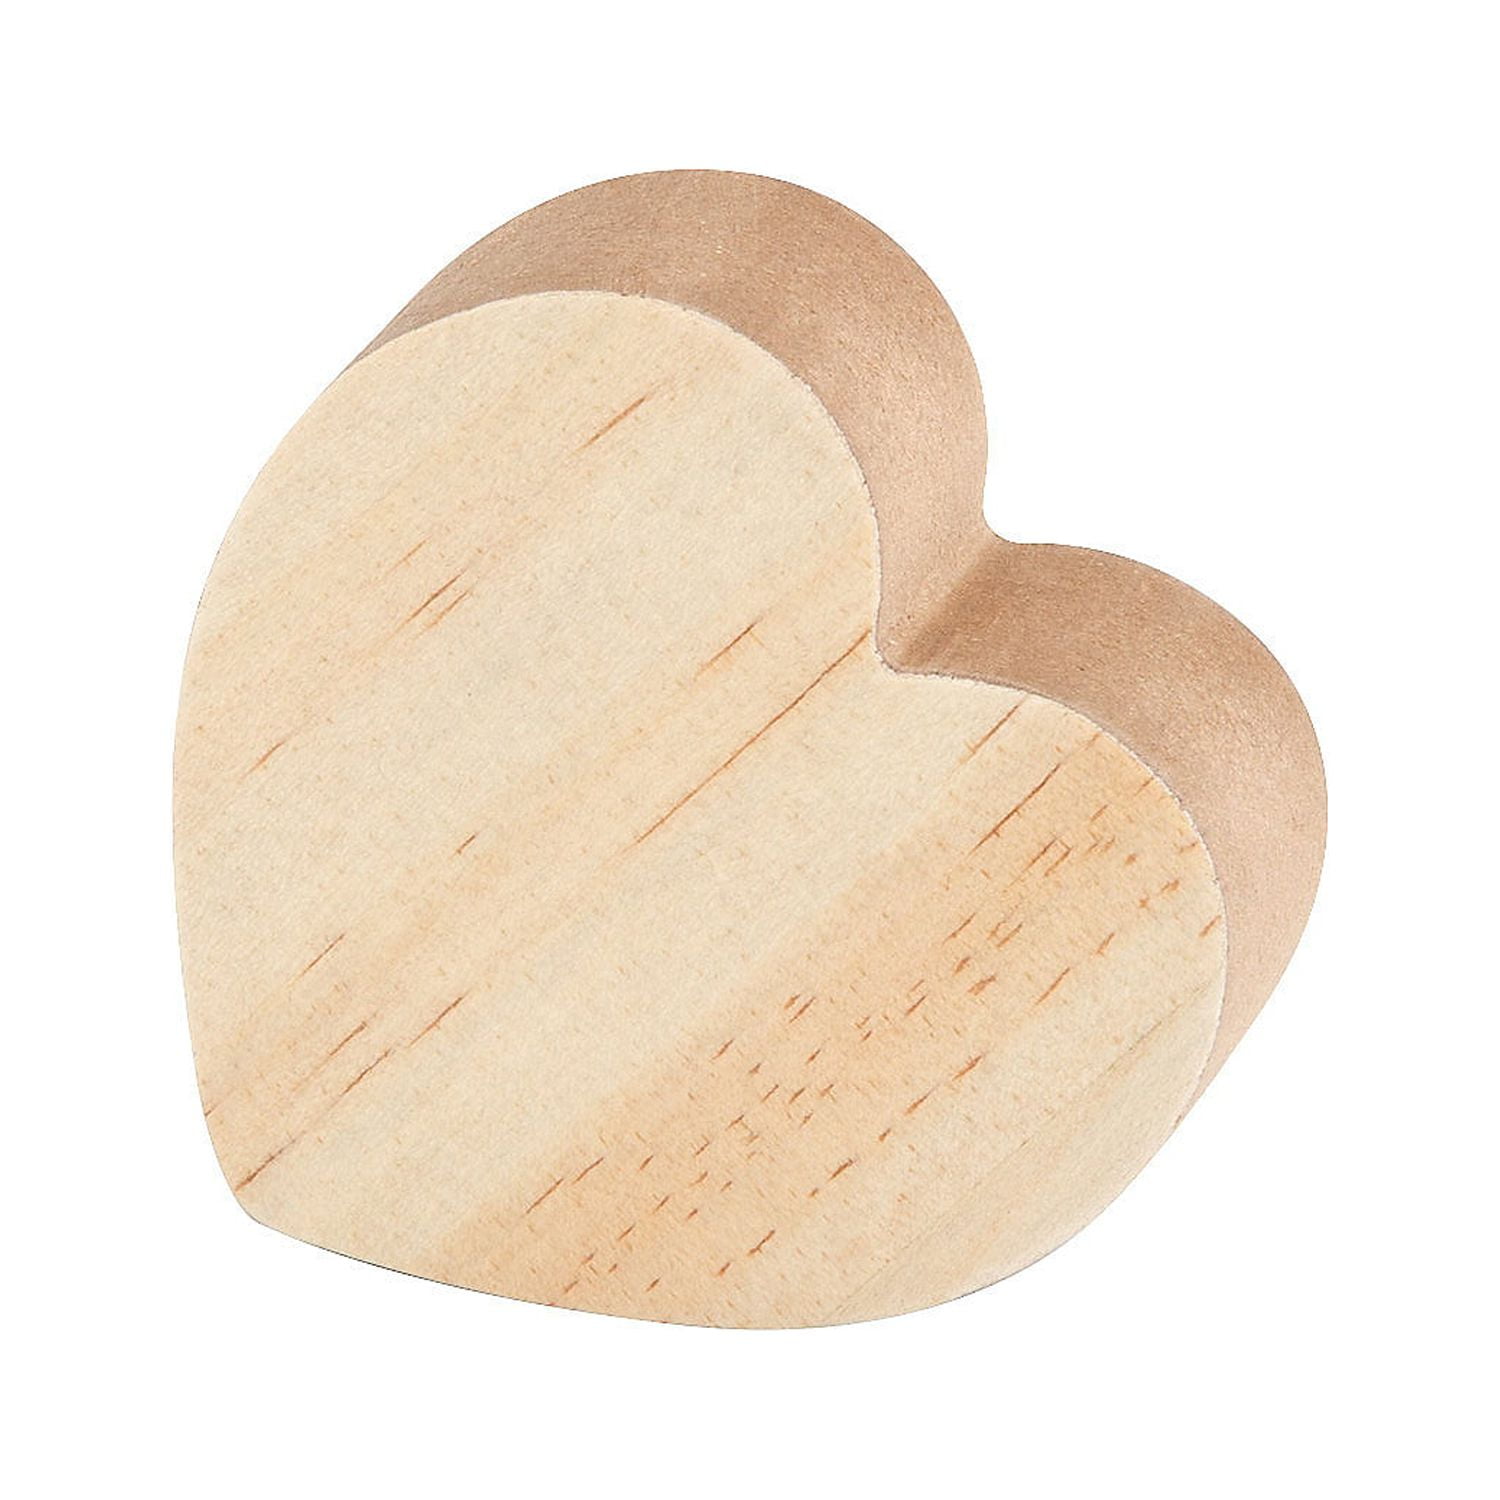 Unfinished Wood Hearts, Wood Valentine Hearts, DIY Tiered Tray Decor,  Unfinished Wood for Painting, Blank Wood Shapes, Gifts for Crafters 